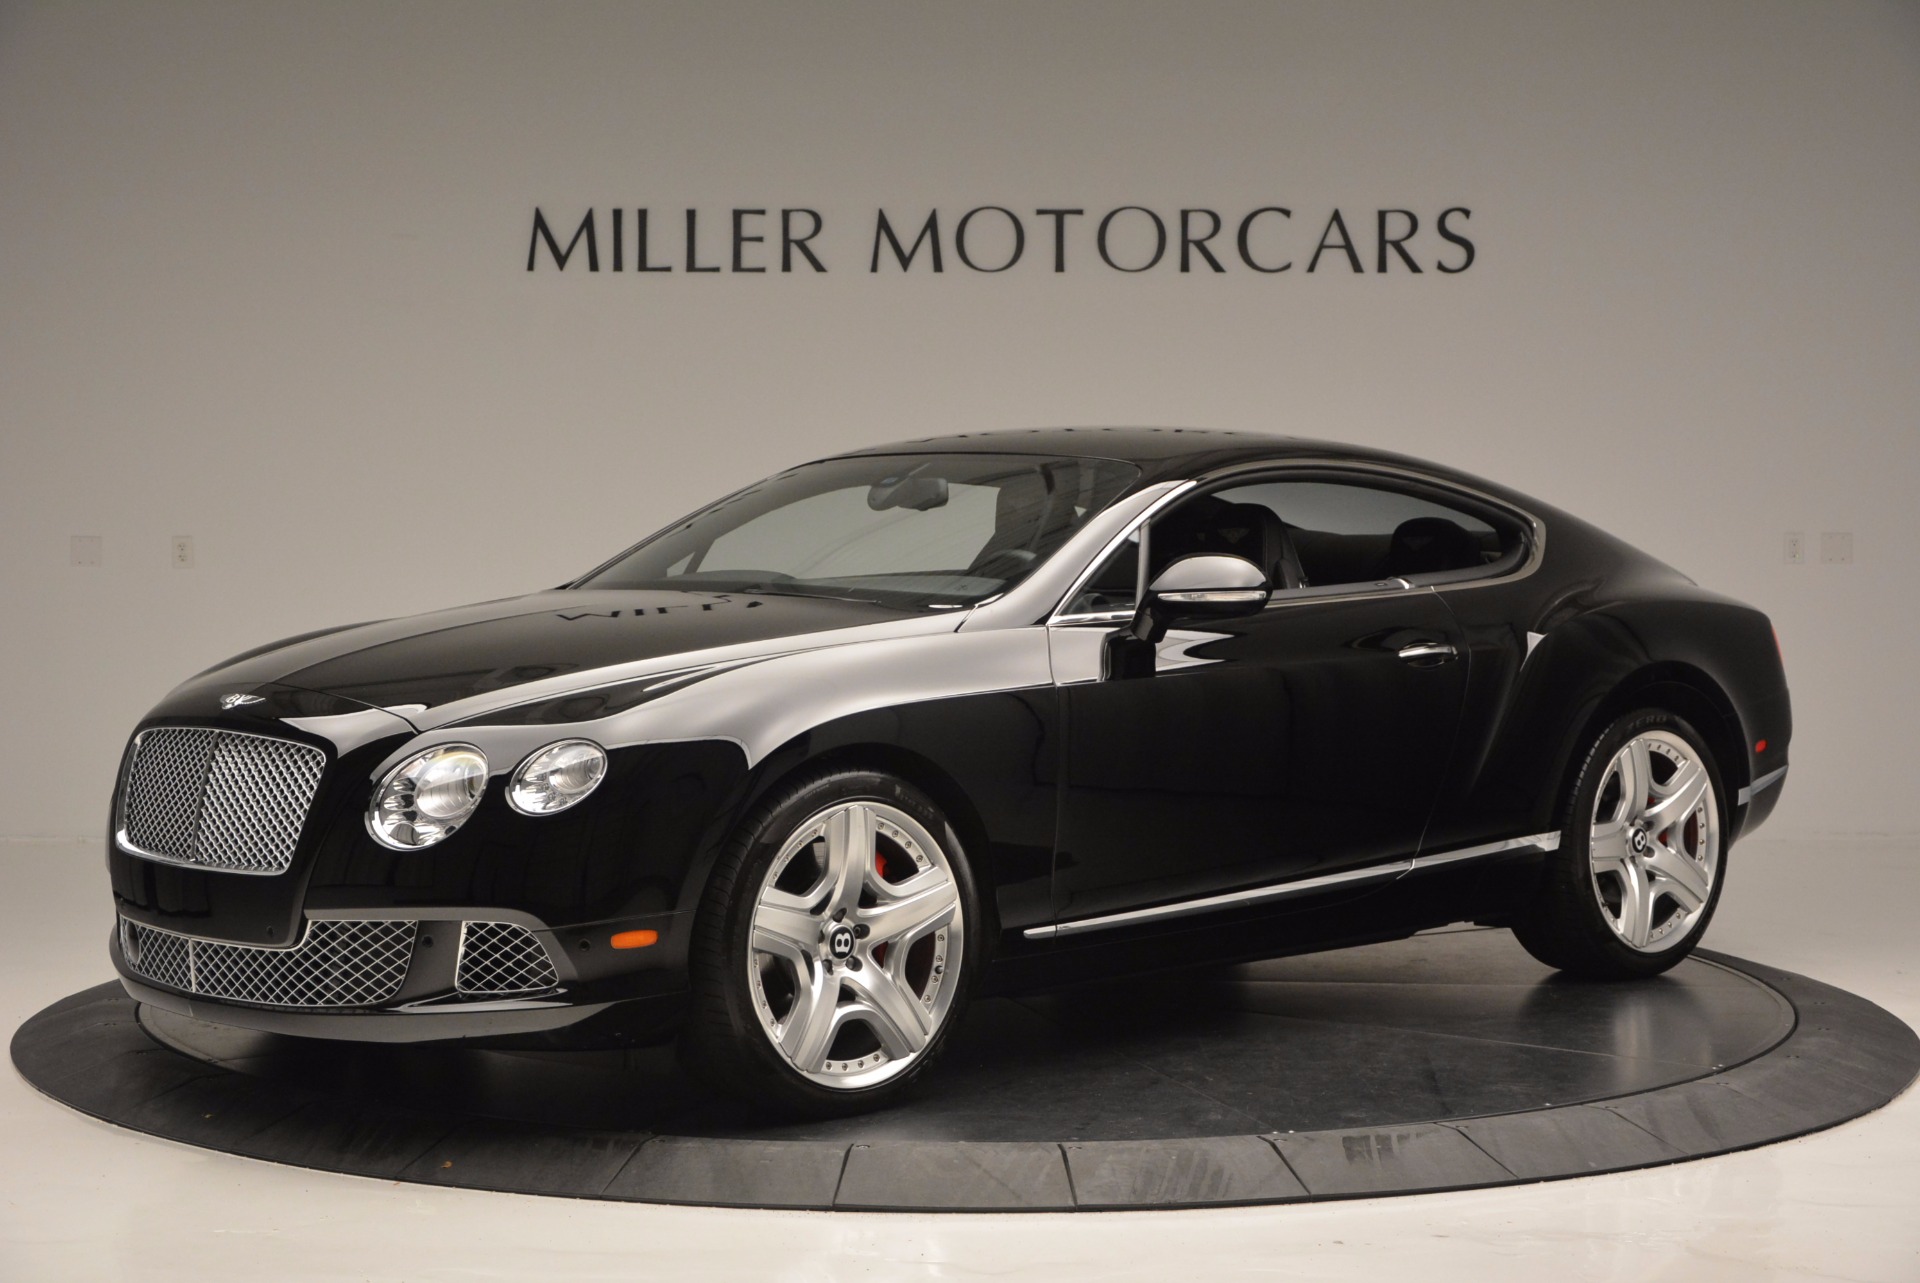 Used 2012 Bentley Continental GT W12 for sale Sold at Rolls-Royce Motor Cars Greenwich in Greenwich CT 06830 1